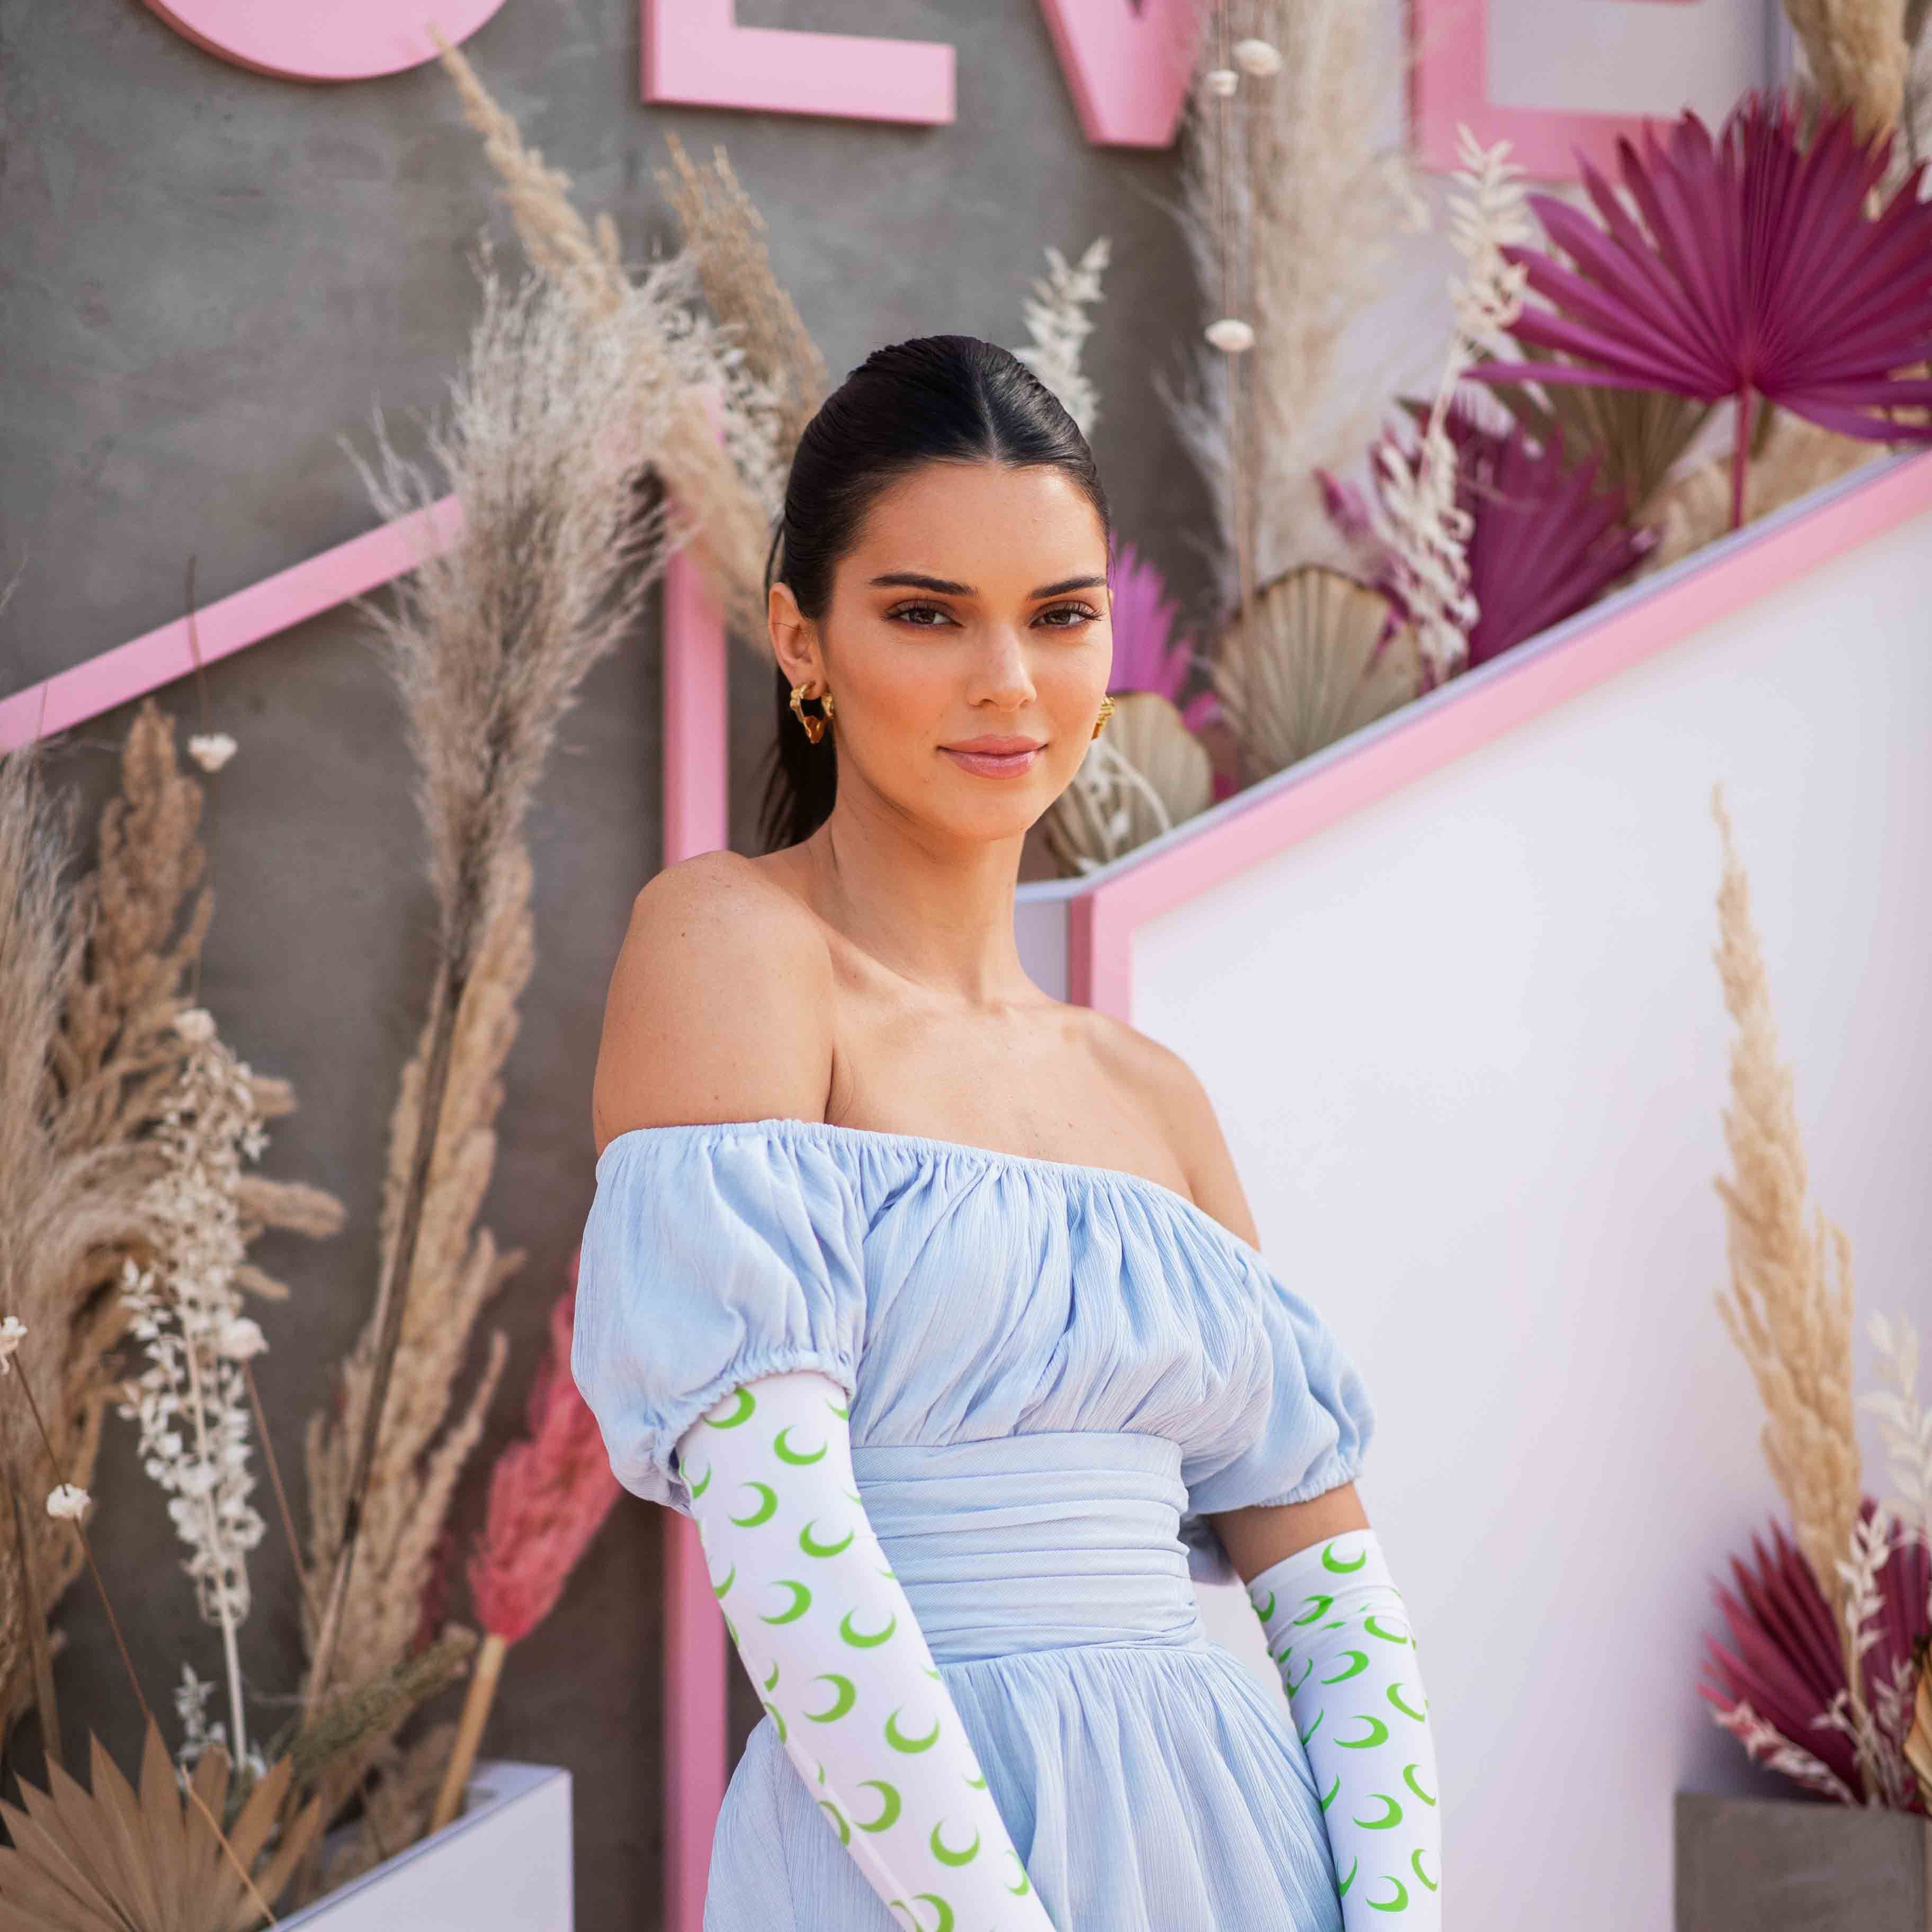 Kendall Jenner Street Style - Kendall Jenner's Best Fashion Looks